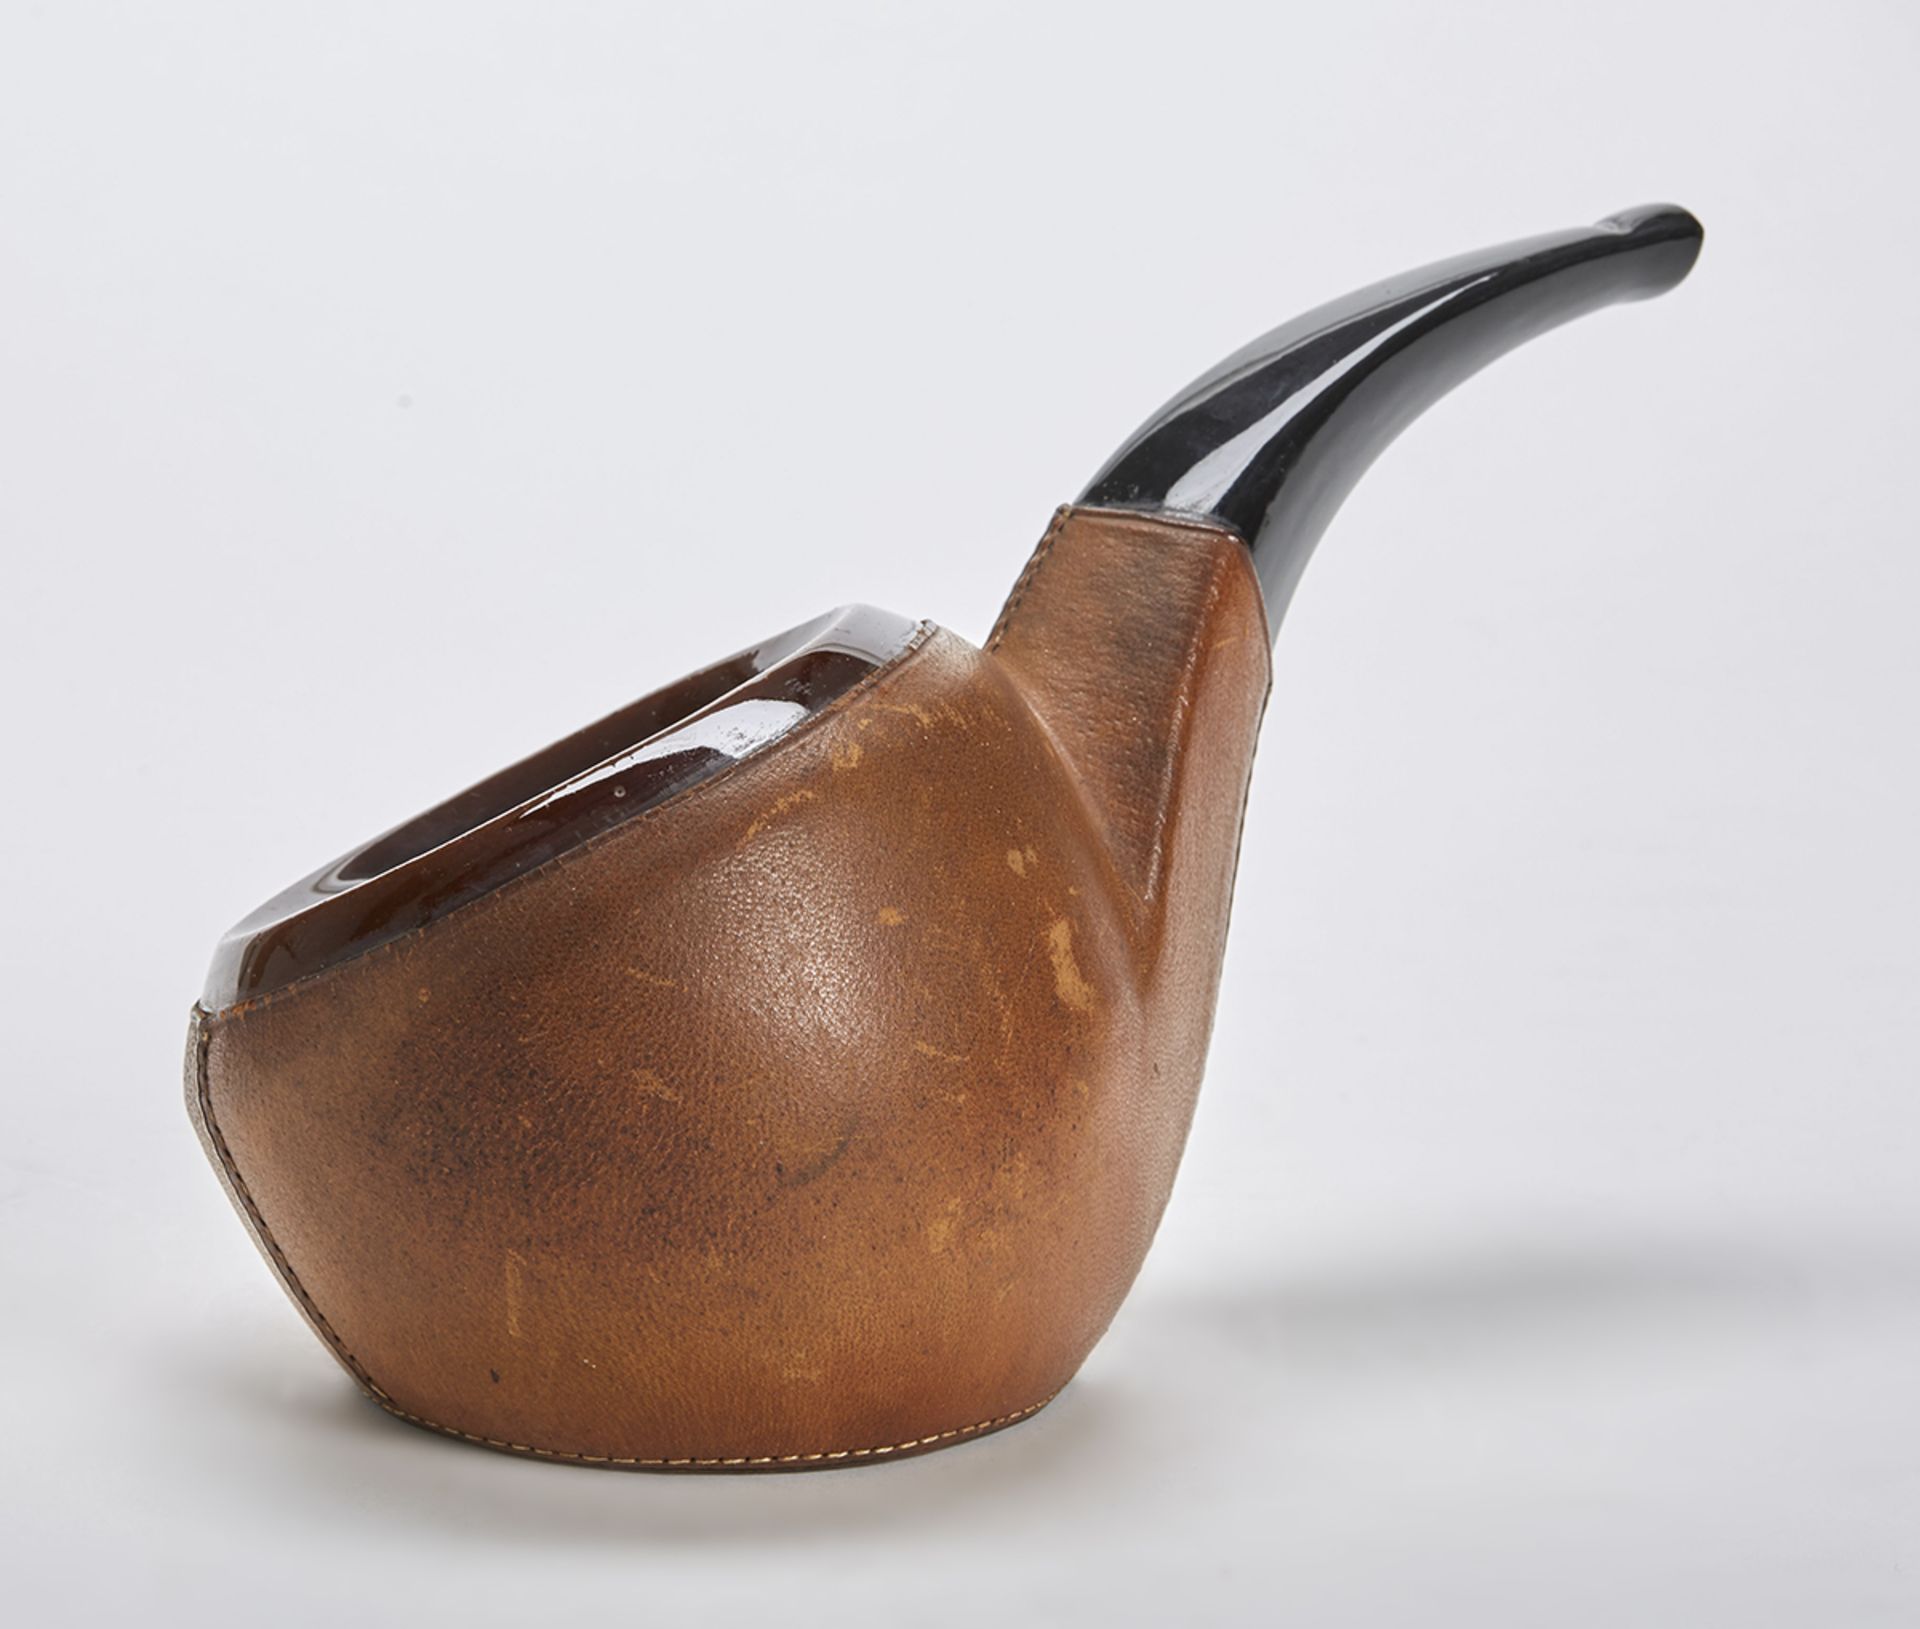 Ceramic & Leather Pipe Container By George Jouve C.1950 - Image 4 of 7